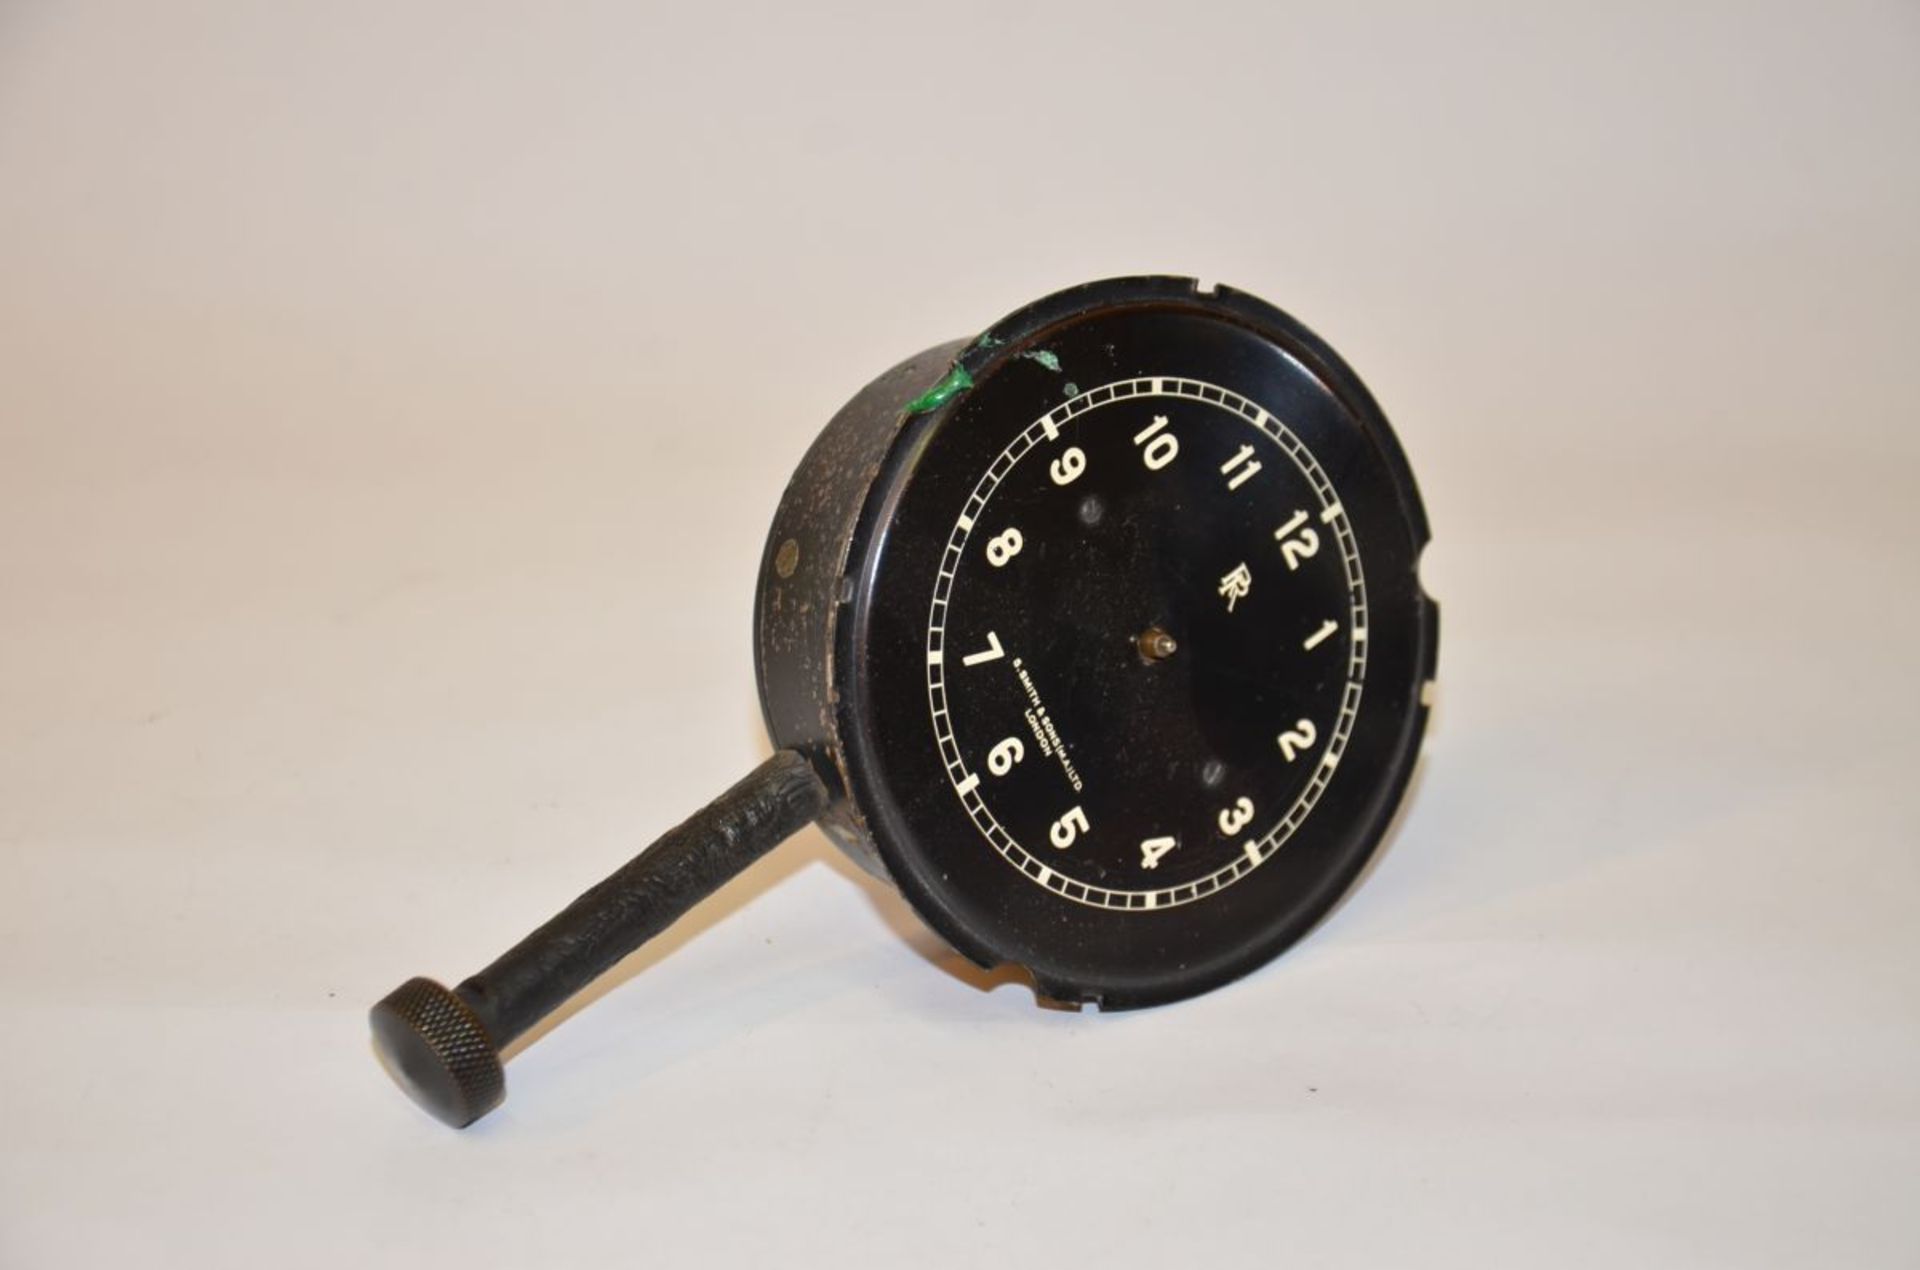 Rolls-Royce Clock by "S.Smith & Sons" missing clock hands